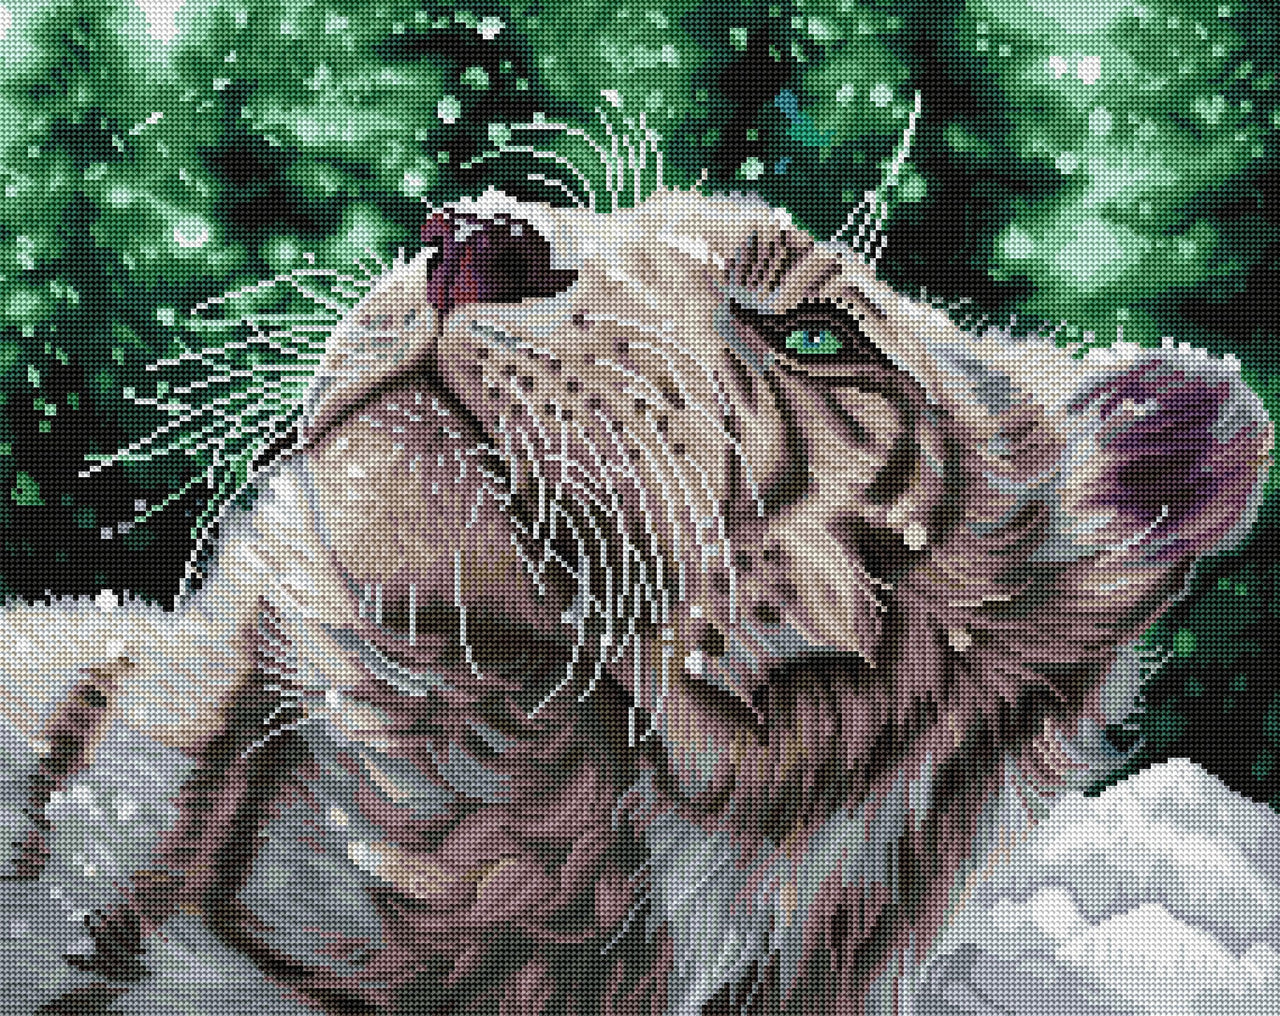 Diamond Painting Snow Tiger 25" x 20" (63.9cm x 50.7cm) / Round With 34 Colors Including 2 ABs / 41,268